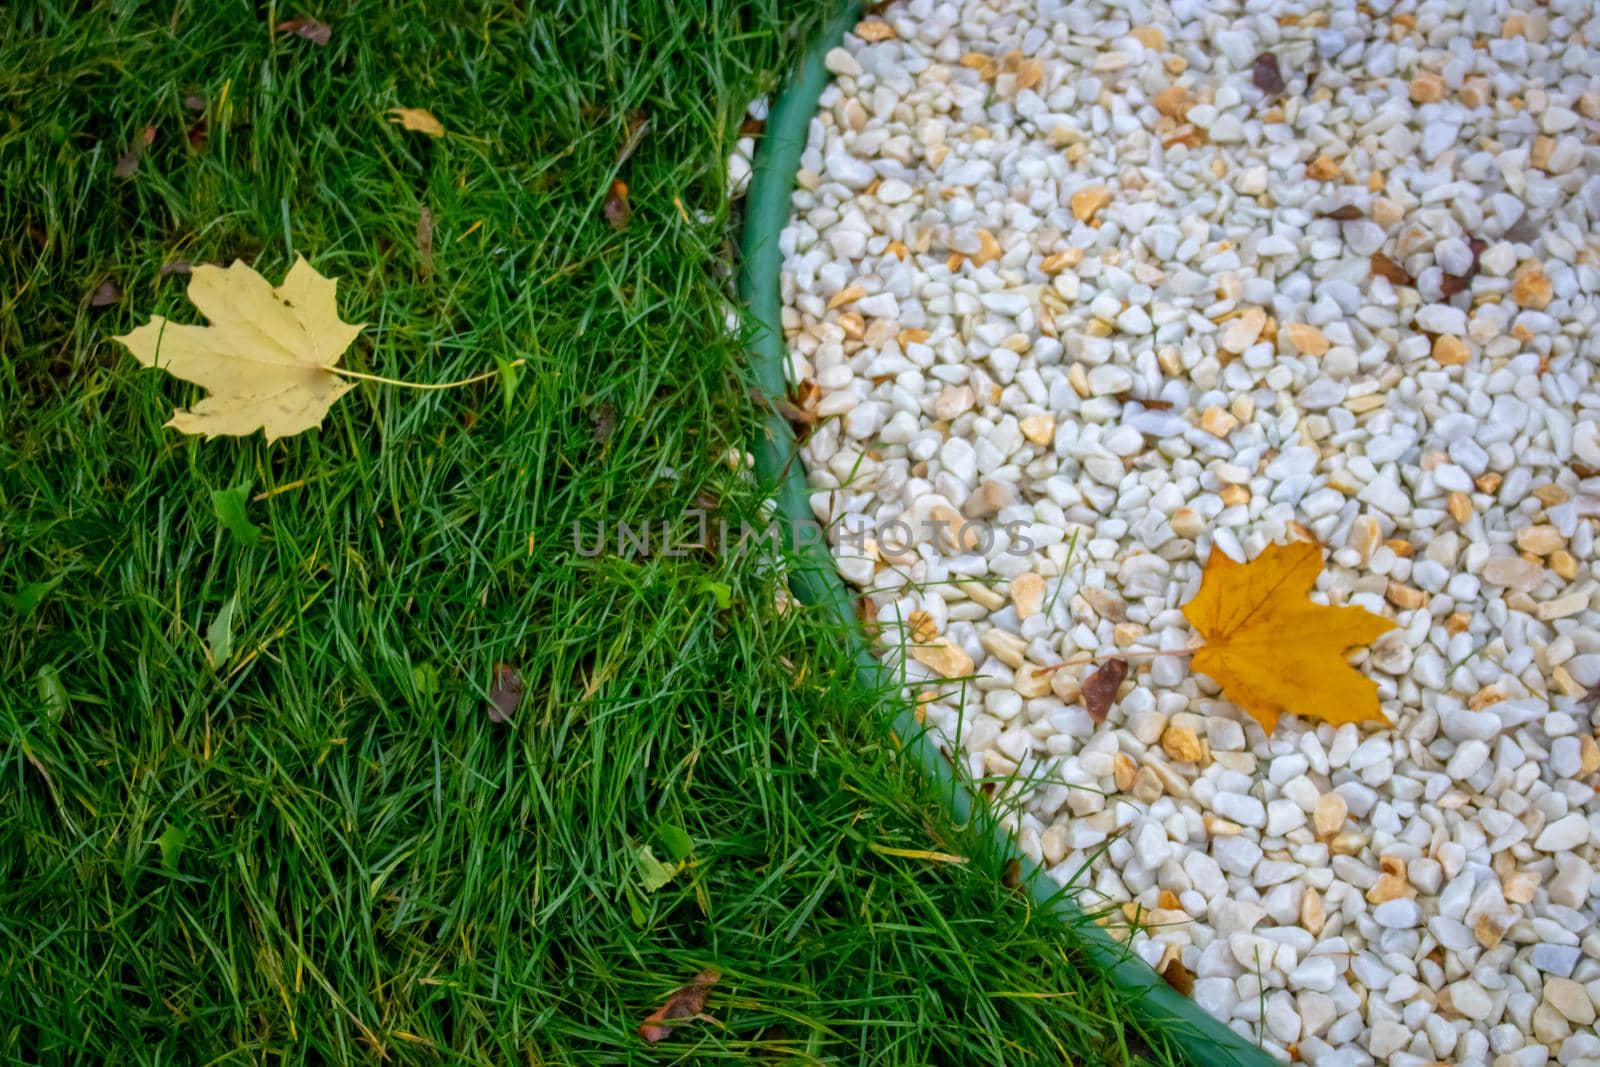 Paving stones covered with leaves and grass. Happy, golden autumn by lapushka62